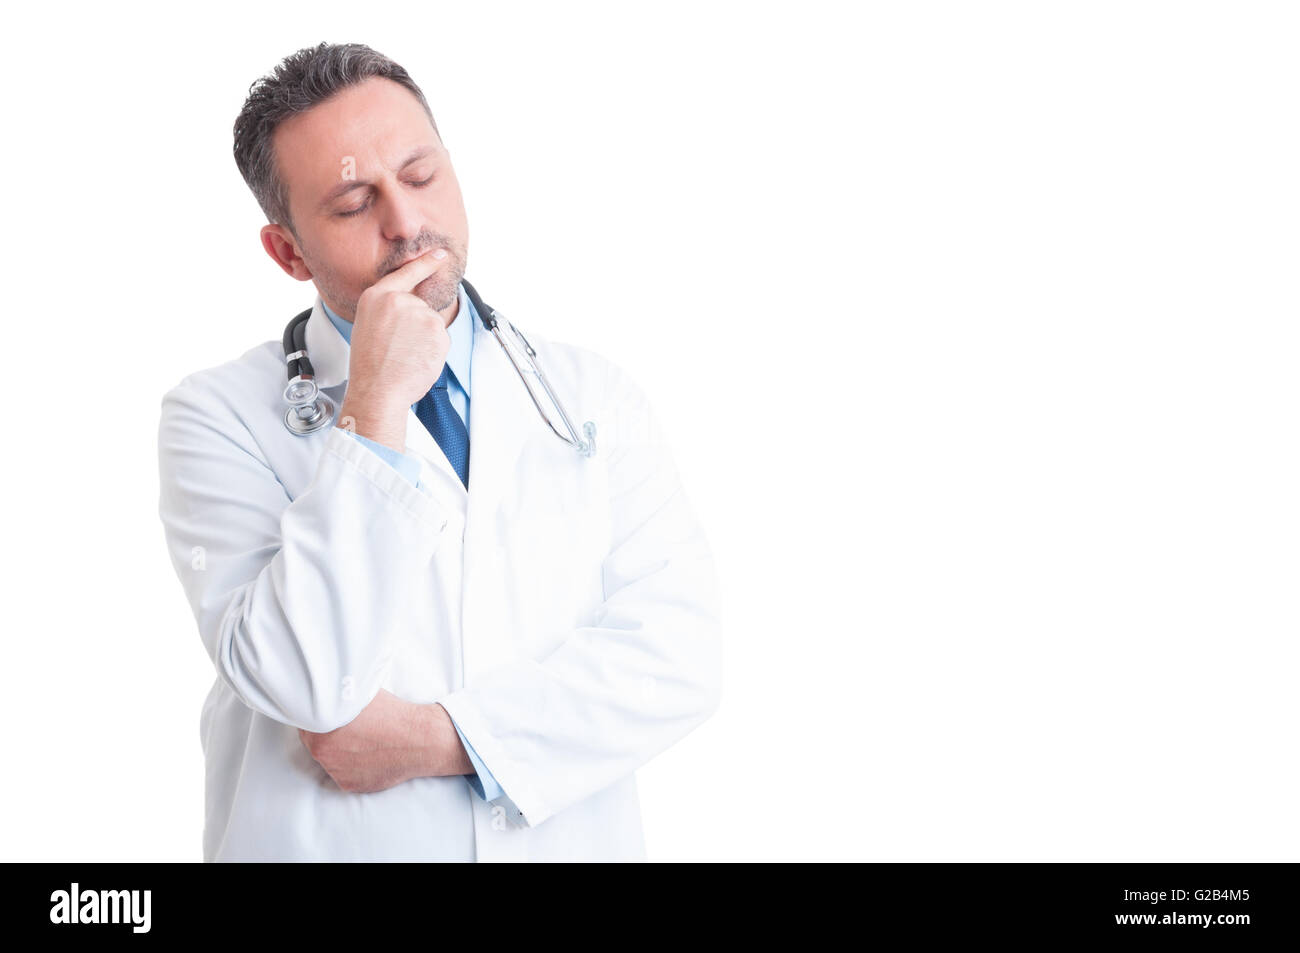 Pensive doctor or medic isolated on white background Stock Photo